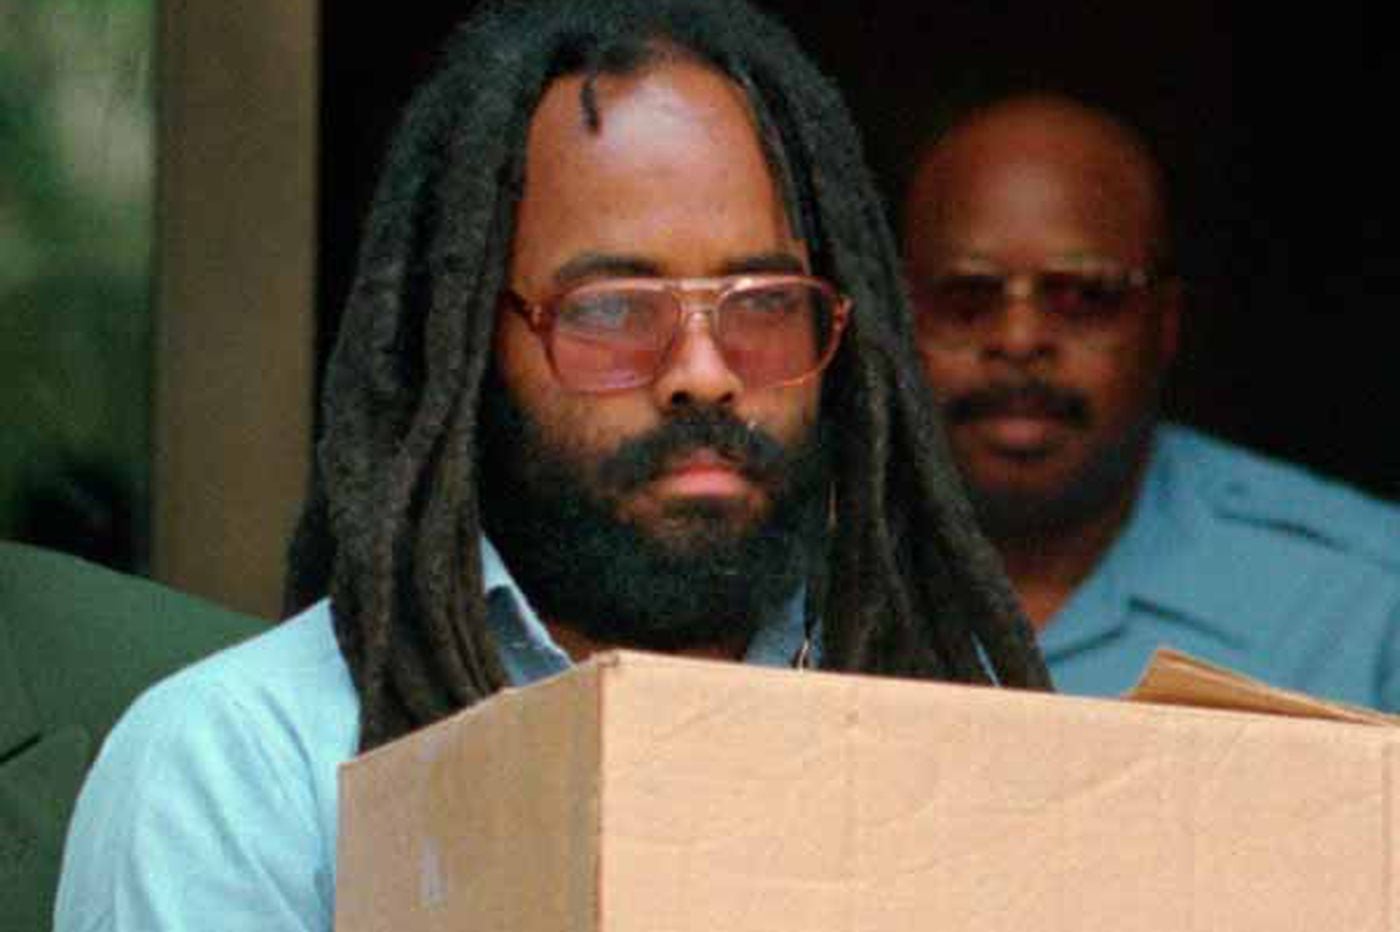 Philly D.A.â€™s Office finds file boxes in Abu-Jamal case